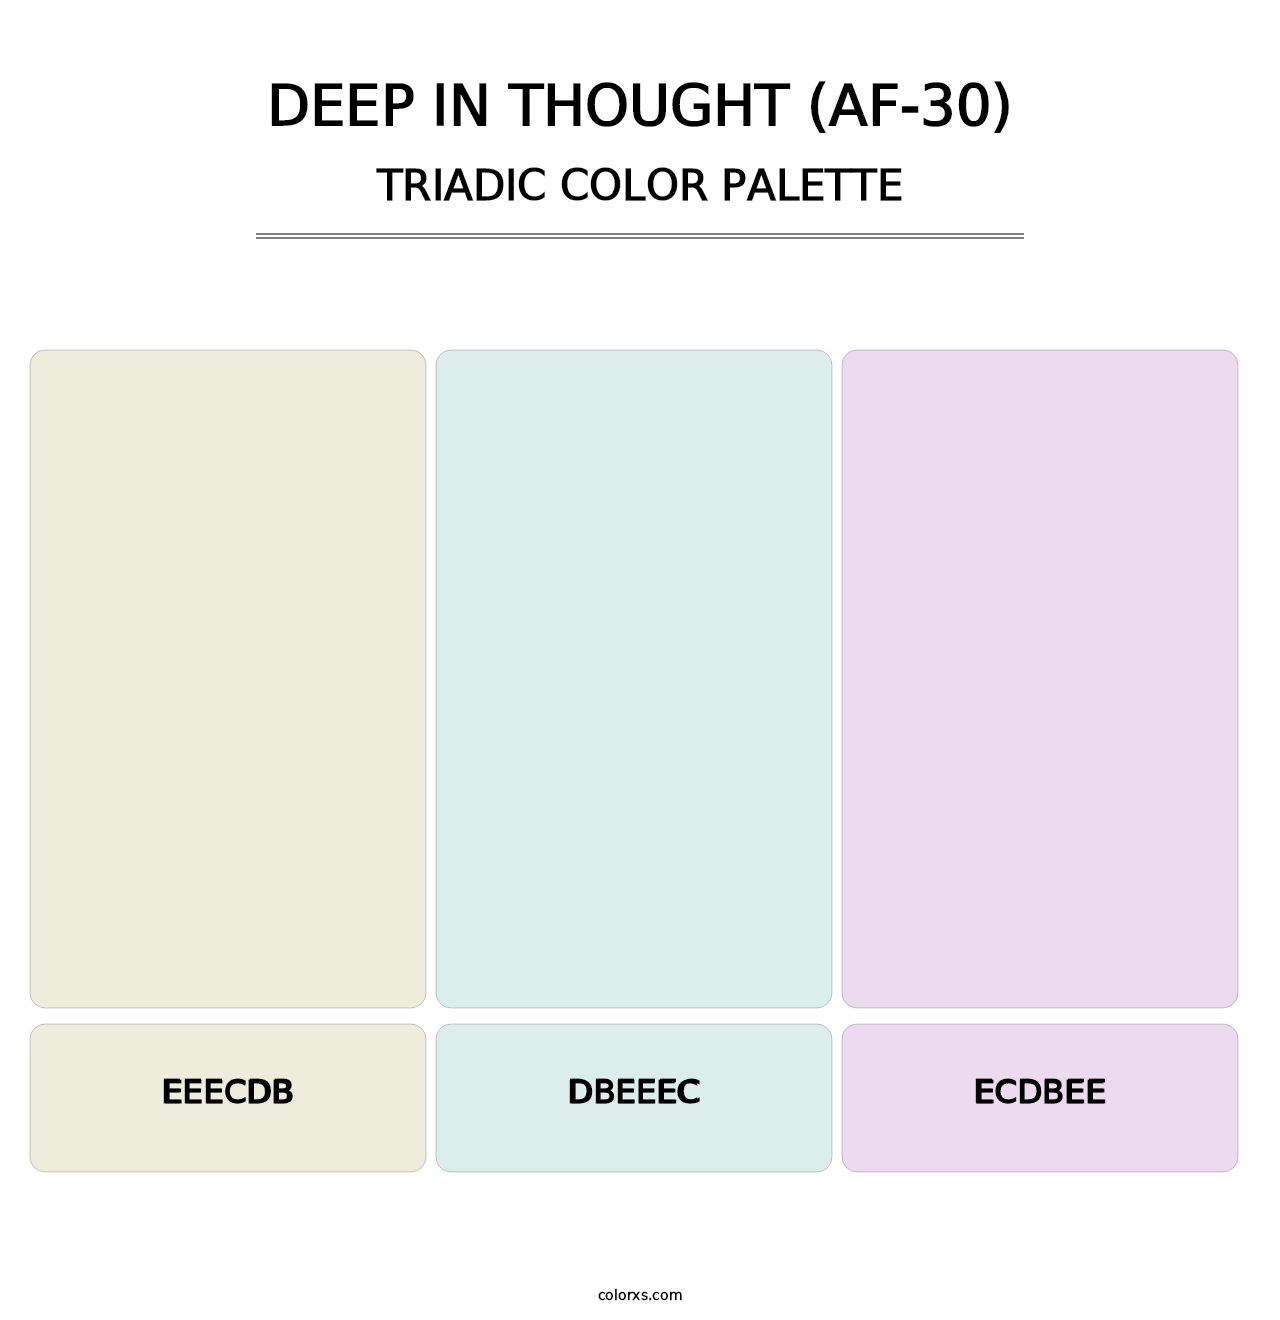 Deep in Thought (AF-30) - Triadic Color Palette